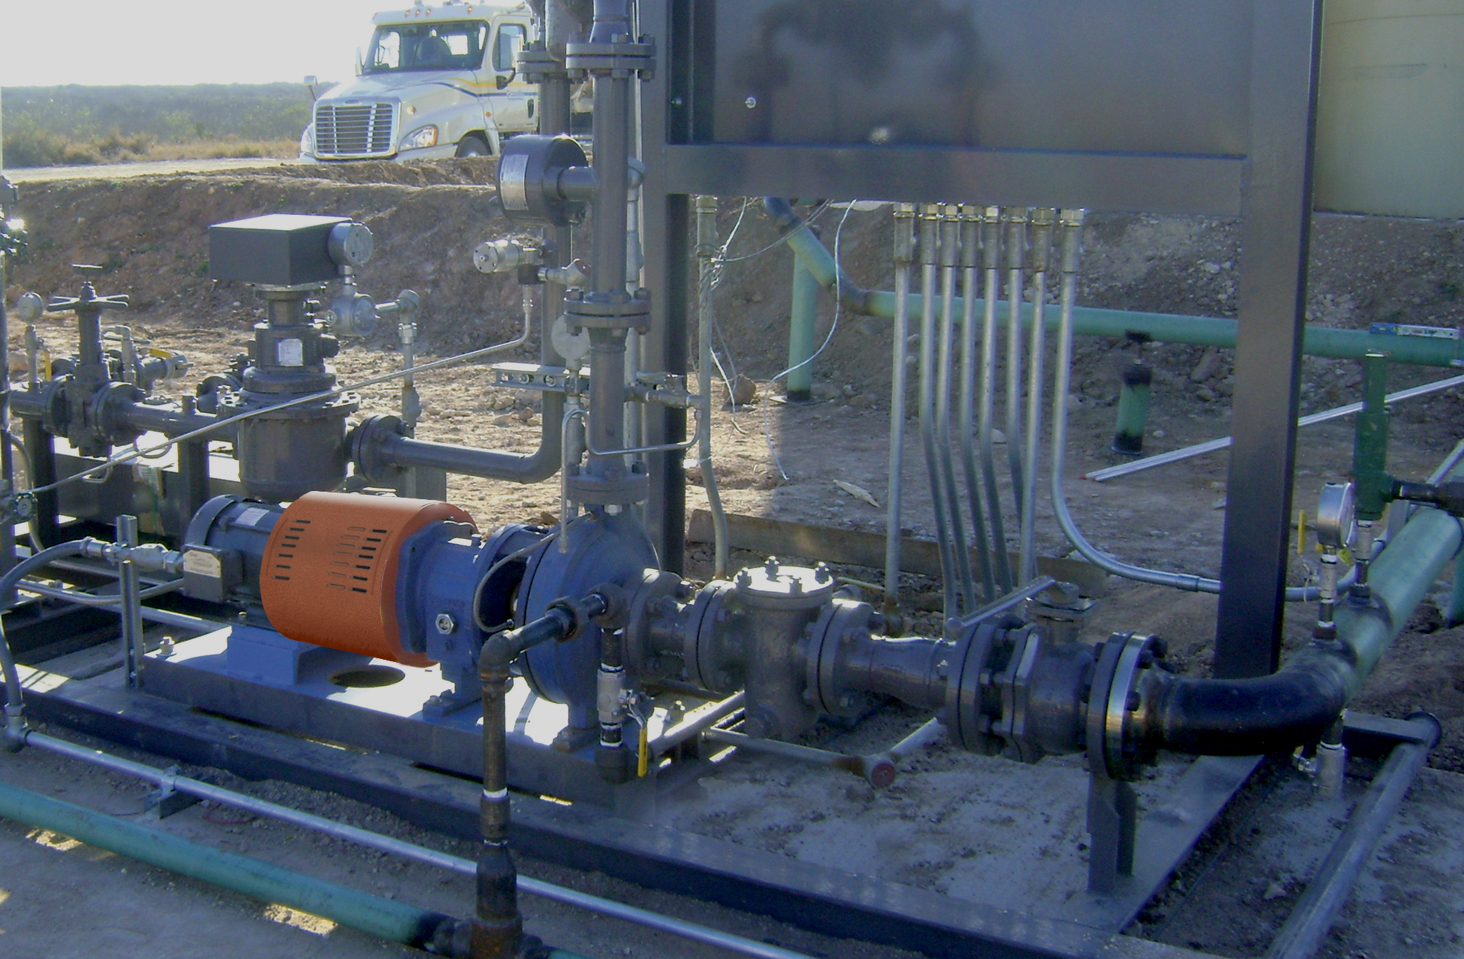 A Griswold 811 Series Centrifugal Pump in action during a Leased Asset Custody Transfer (LACT) operation in the Eagle Ford shale play in Texas.